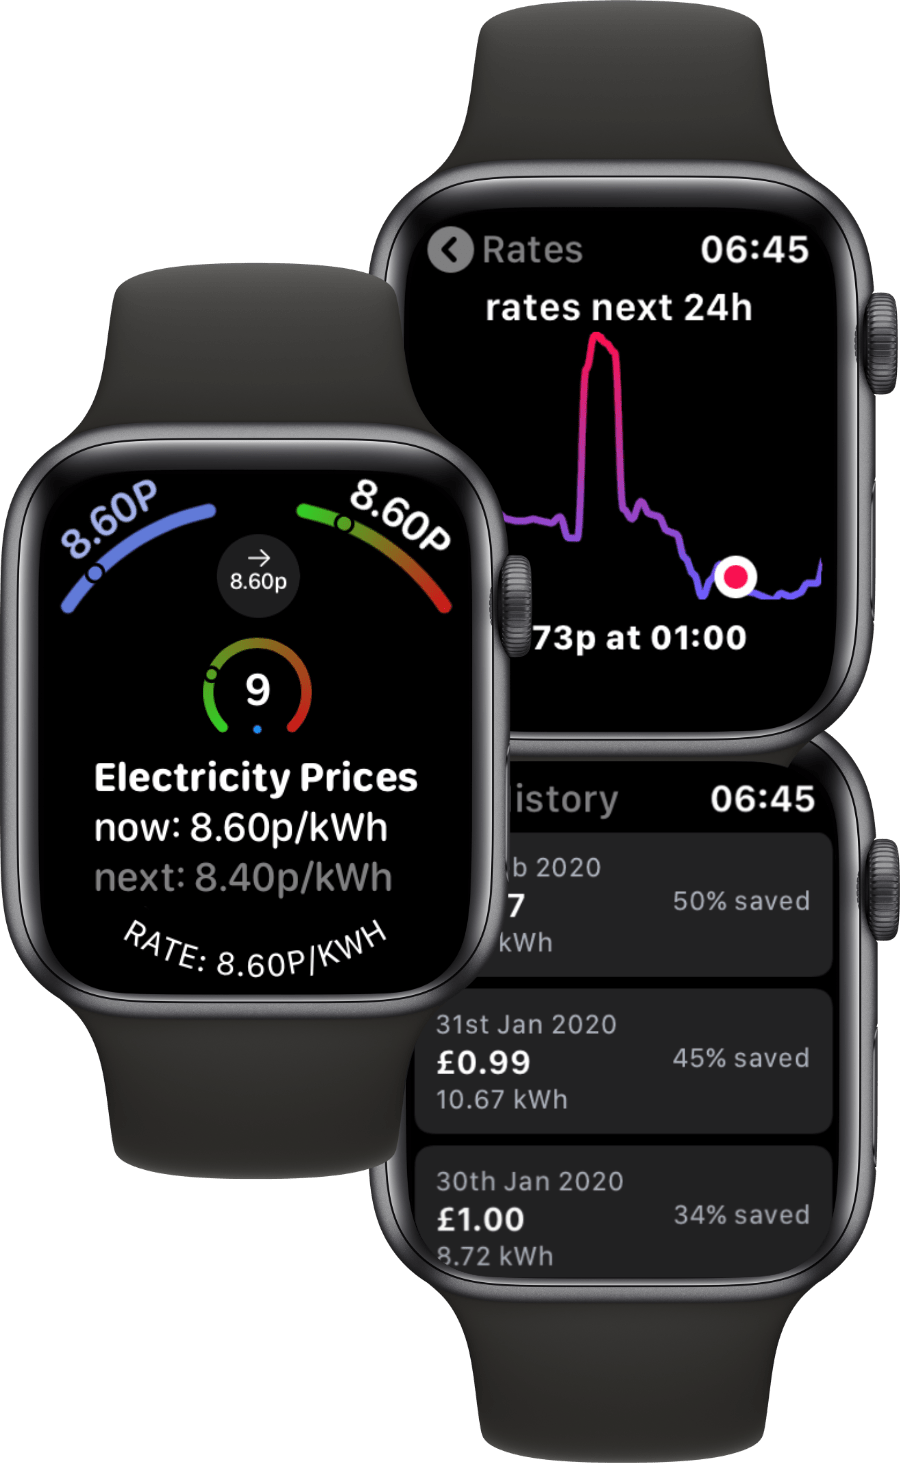 overview of interactions on Apple Watch